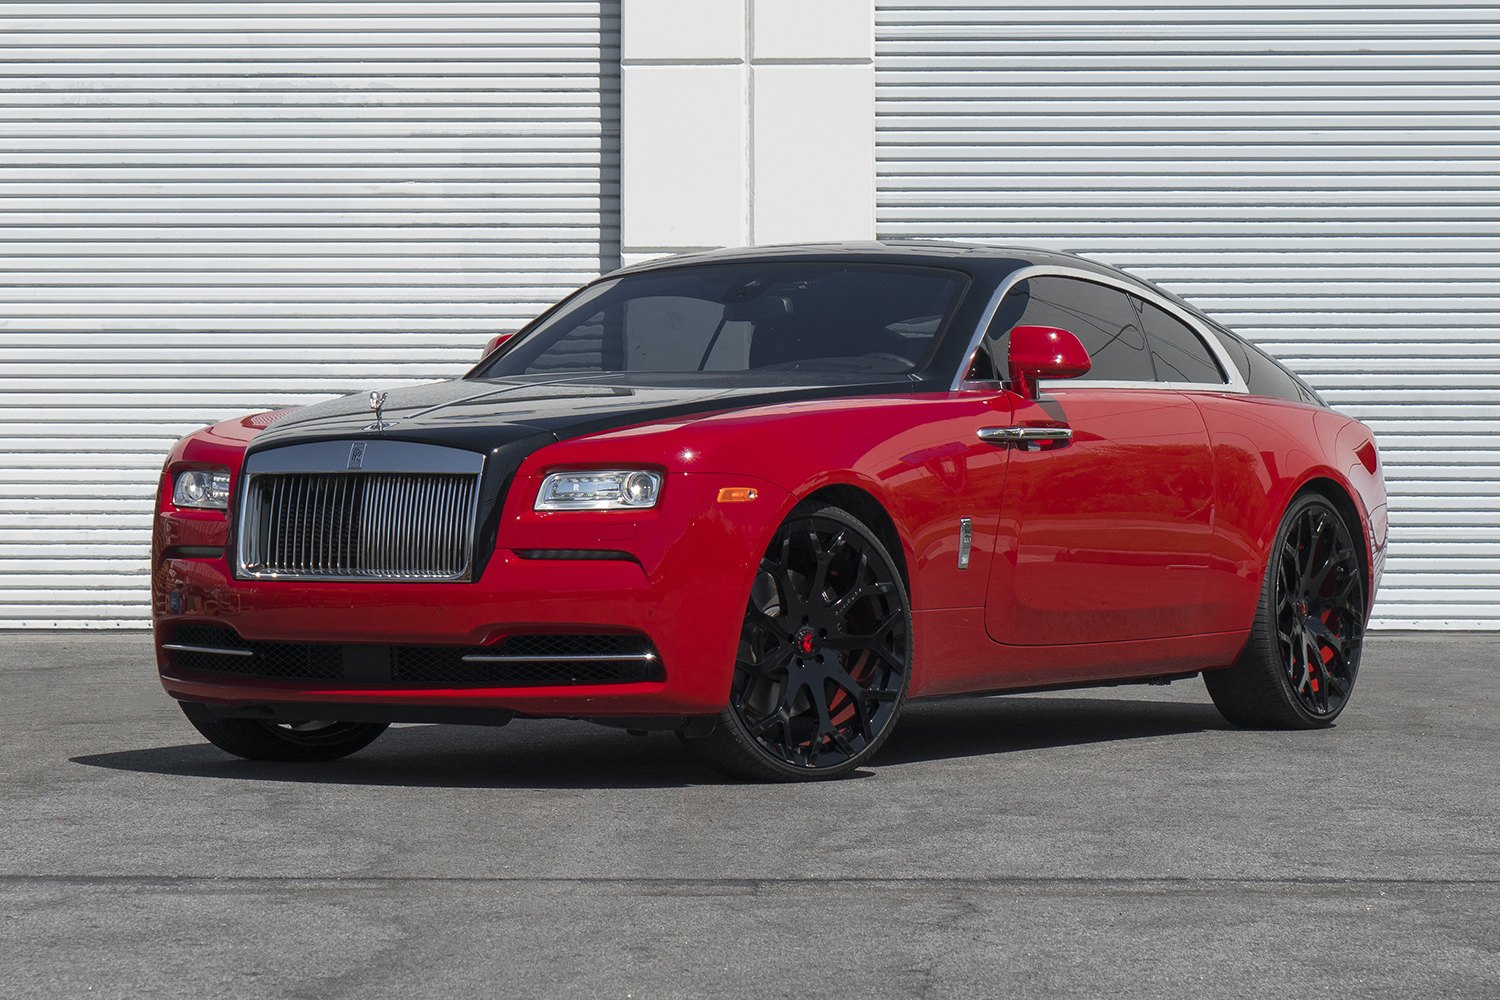 Show Stopper Red Rolls Royce Wraith With Black Hood And